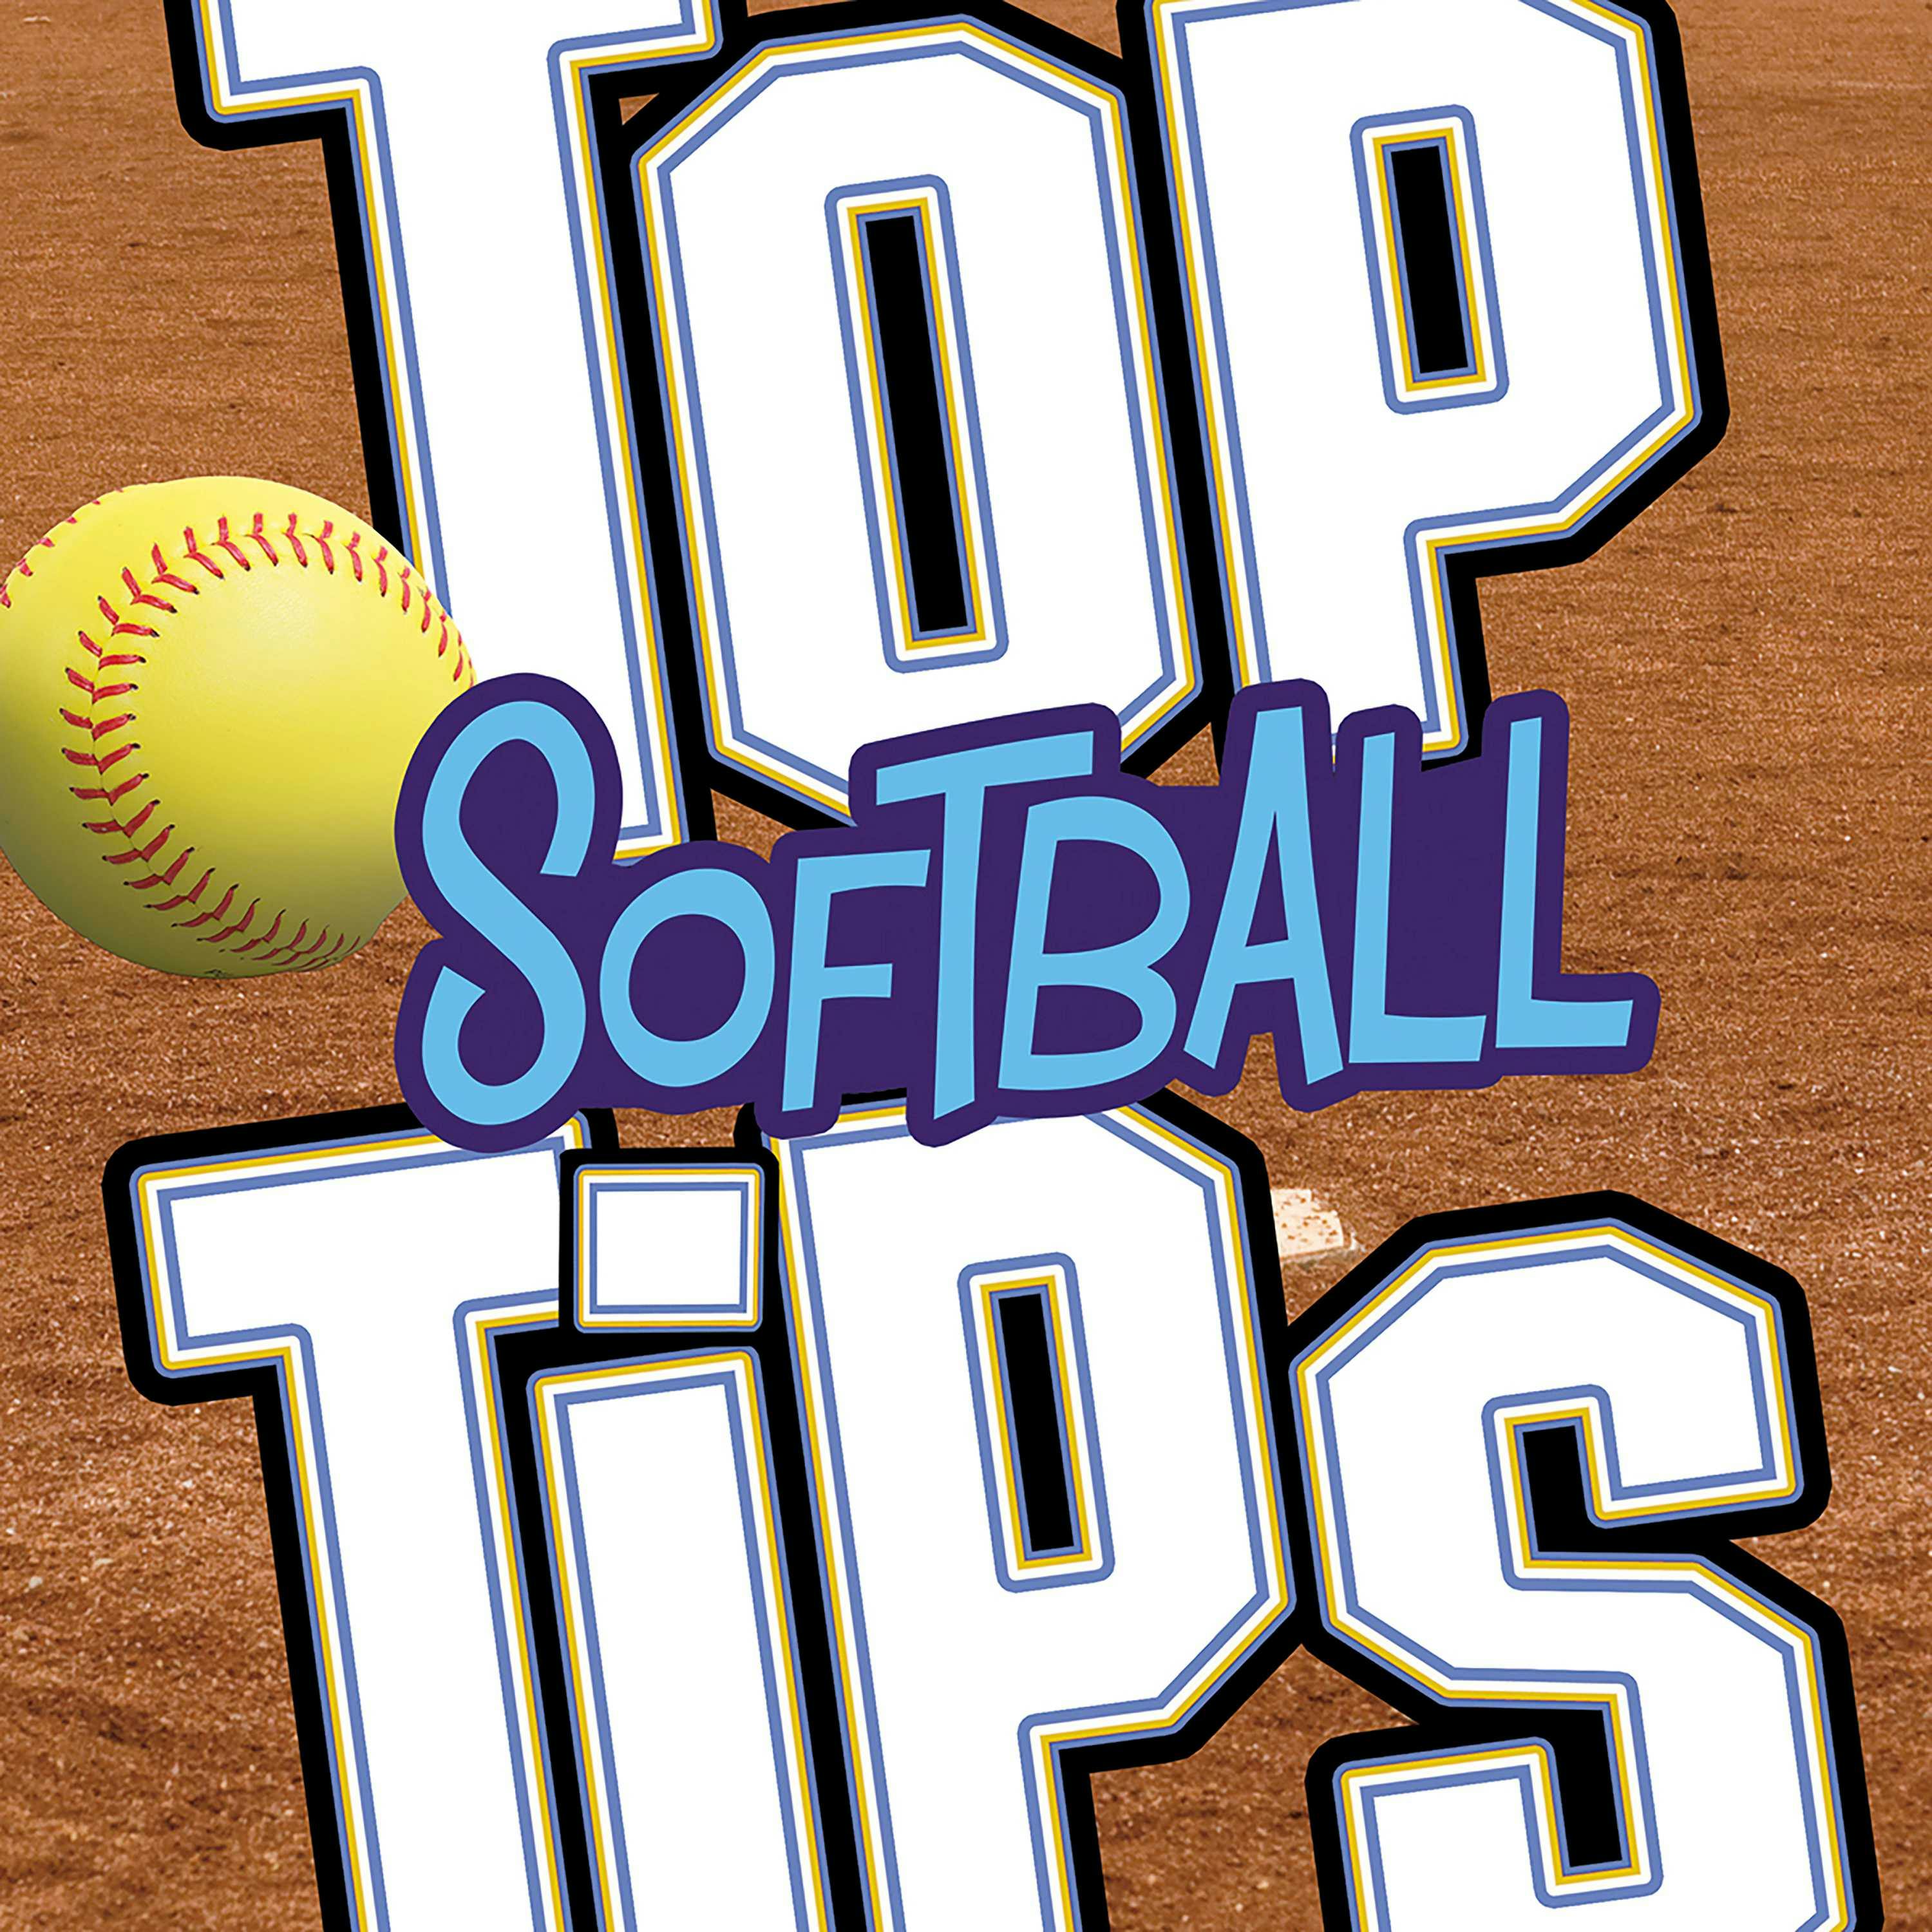 Top Softball Tips - undefined